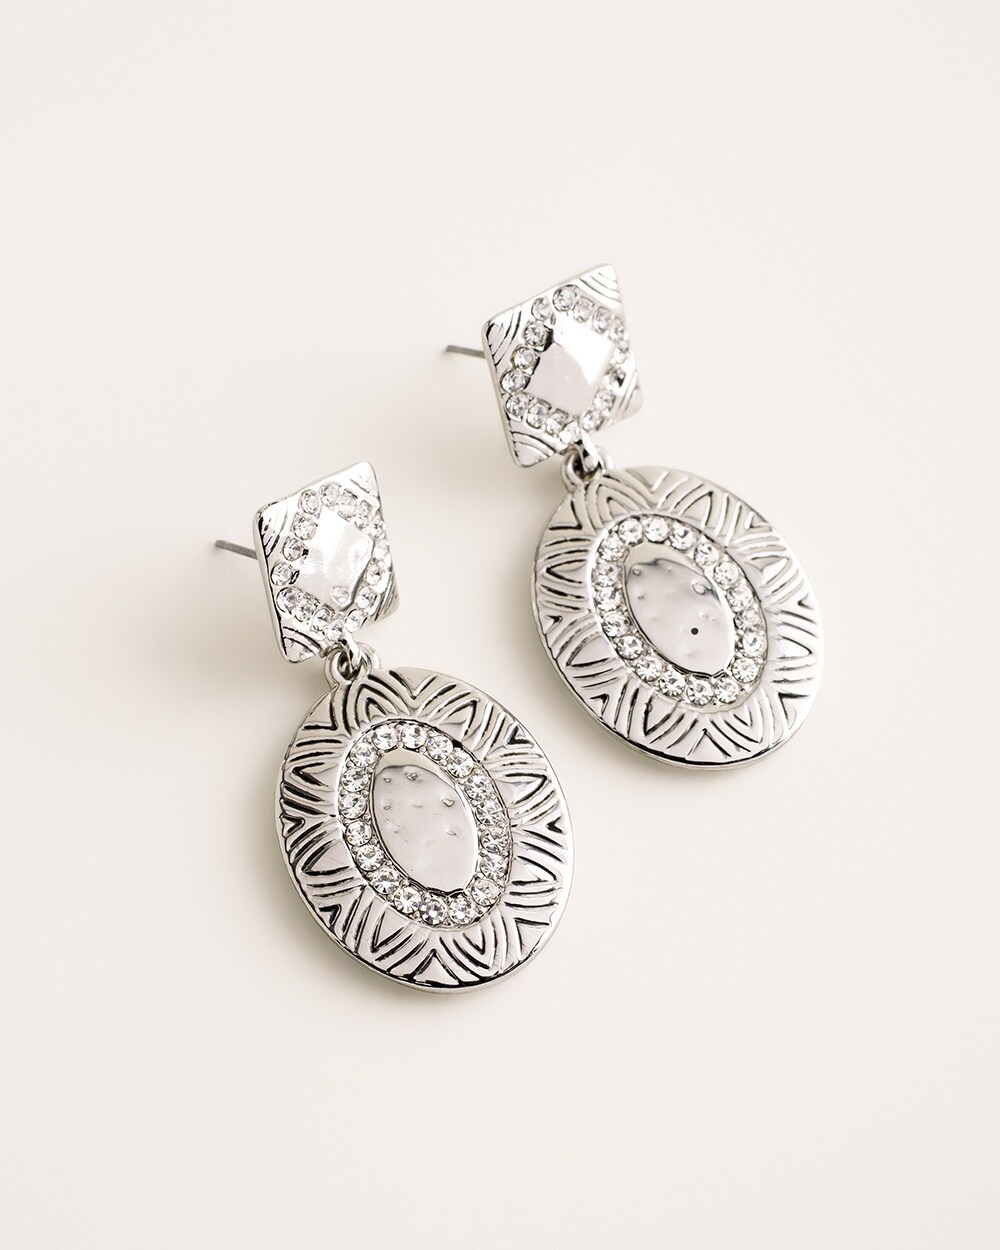 Silvertone Etched Pave Drop Earrings